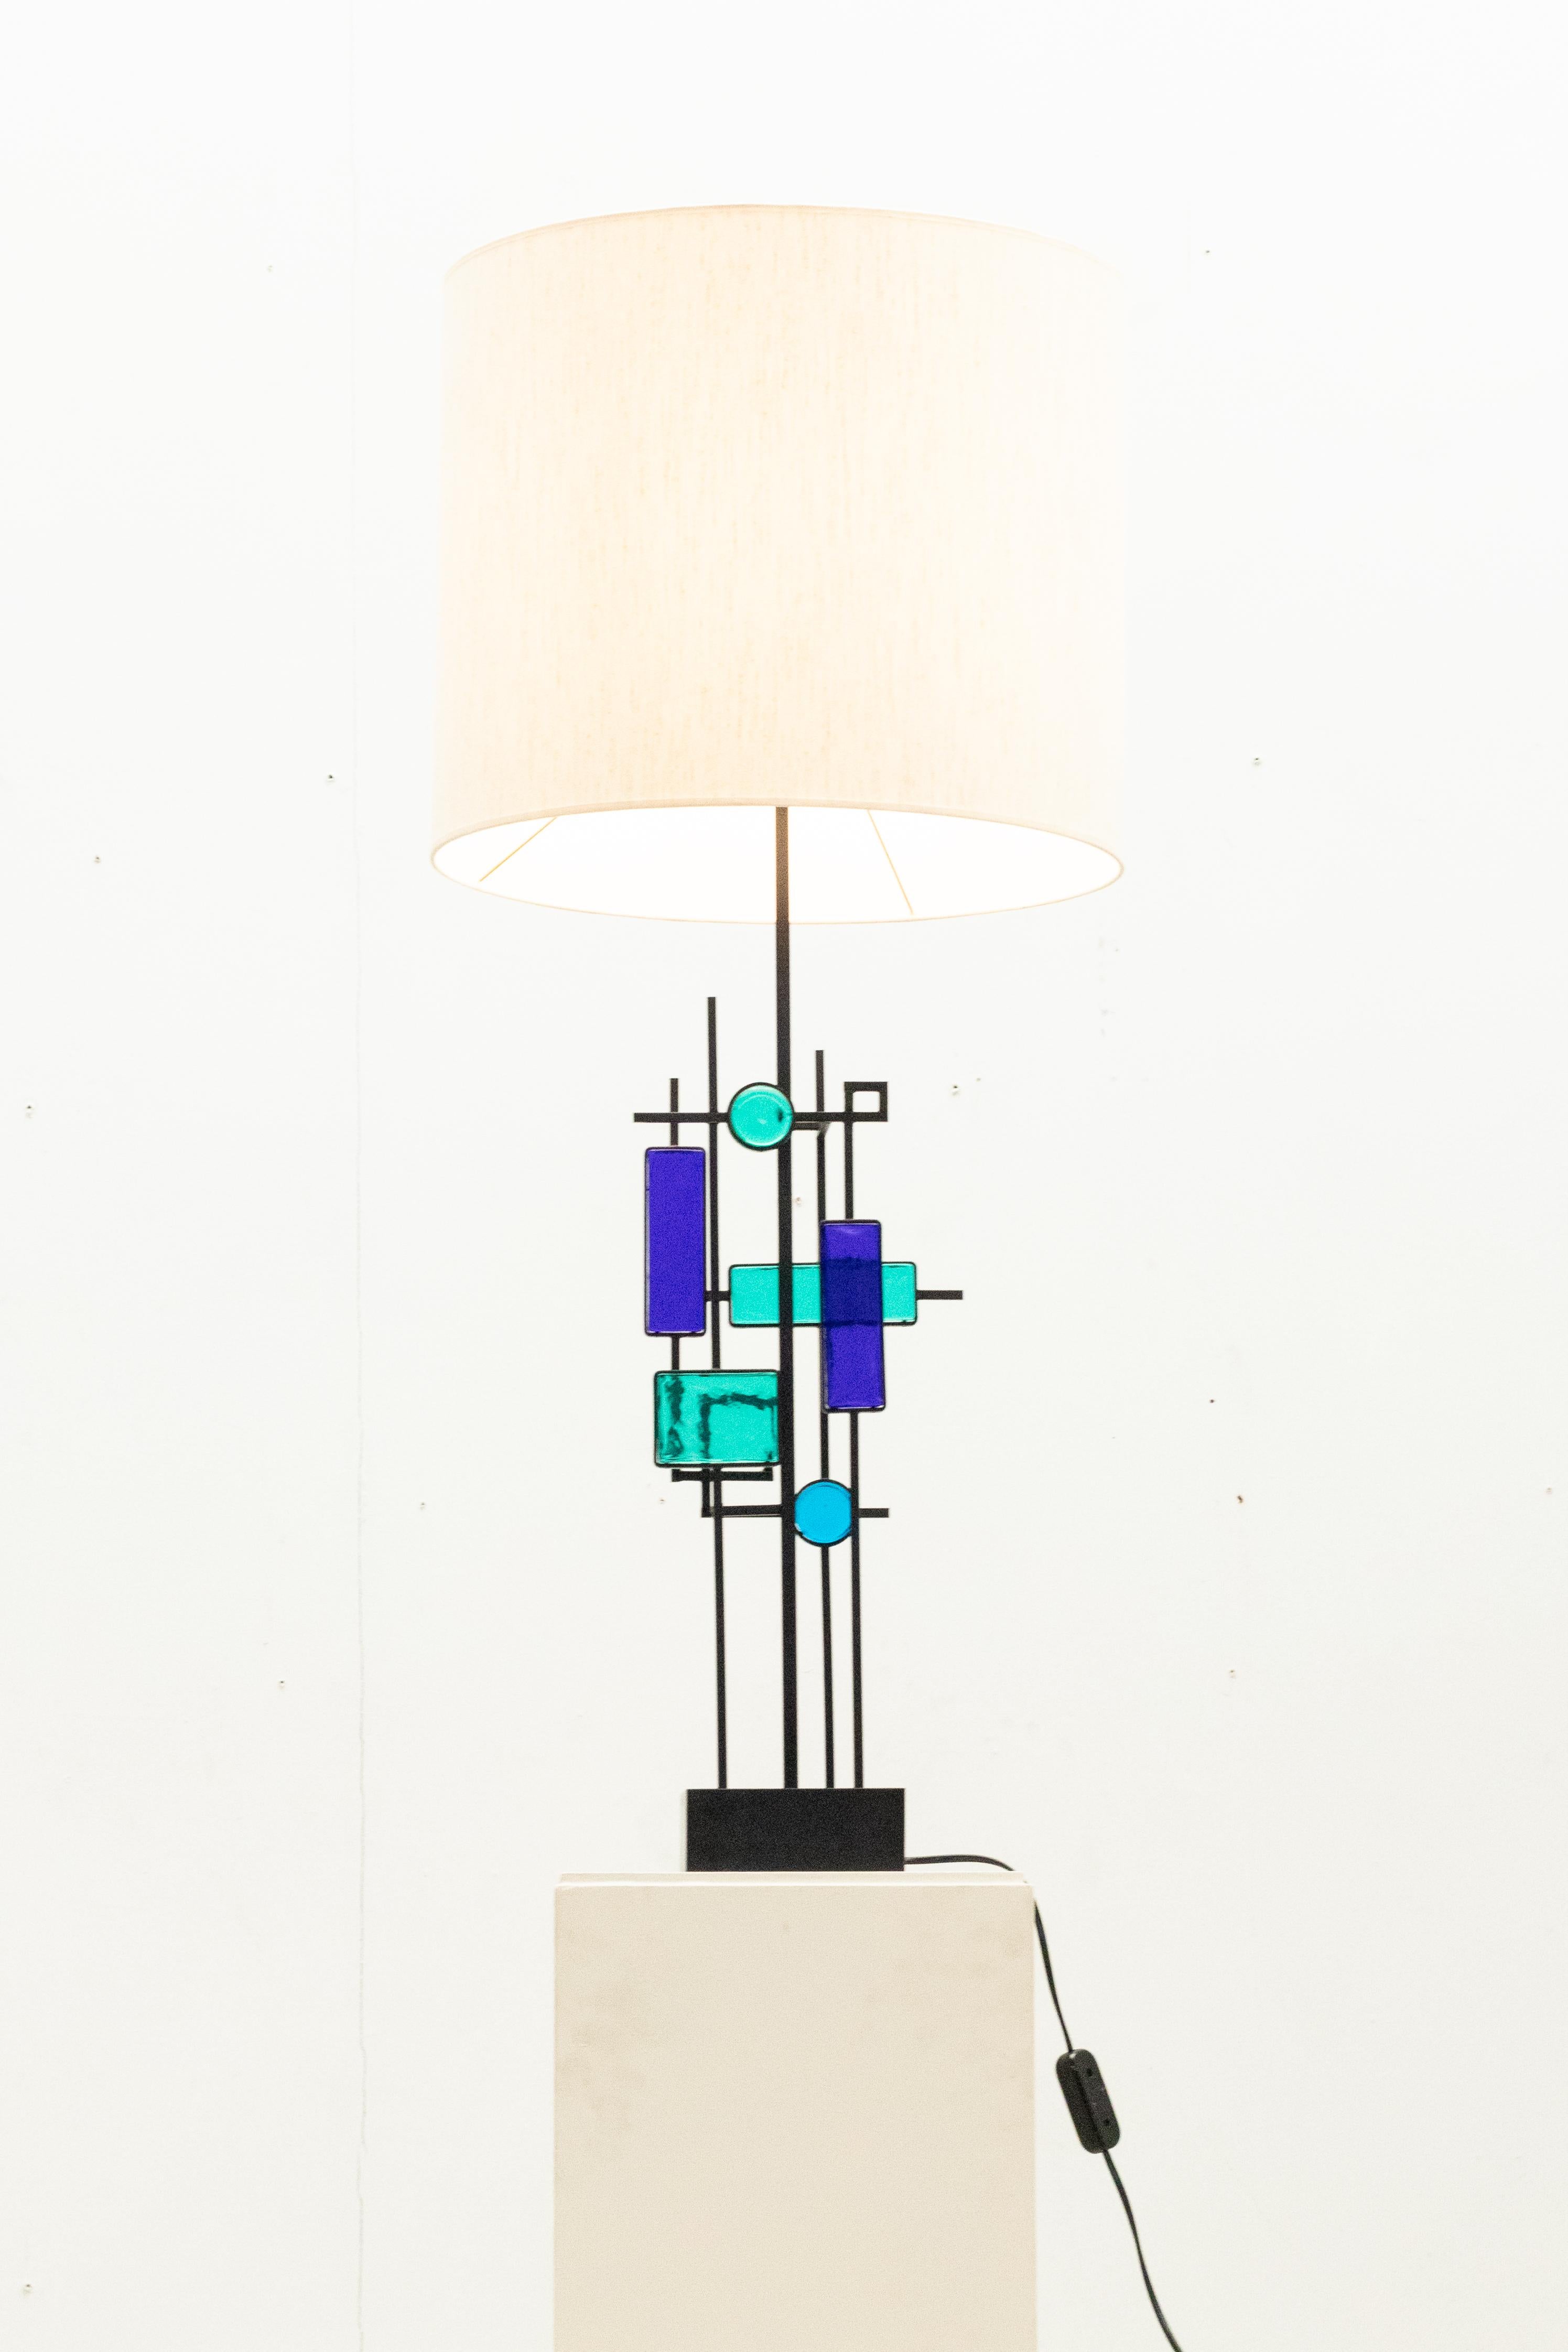 The table lamp crafted in iron and adorned with blue glass stands as a  creation by Svend Aage Holm Sørensen for Holm Sørensen & Co, originating from the 1960s.

New shade.
Great condition.

Do not hesitate to contact us for any additional